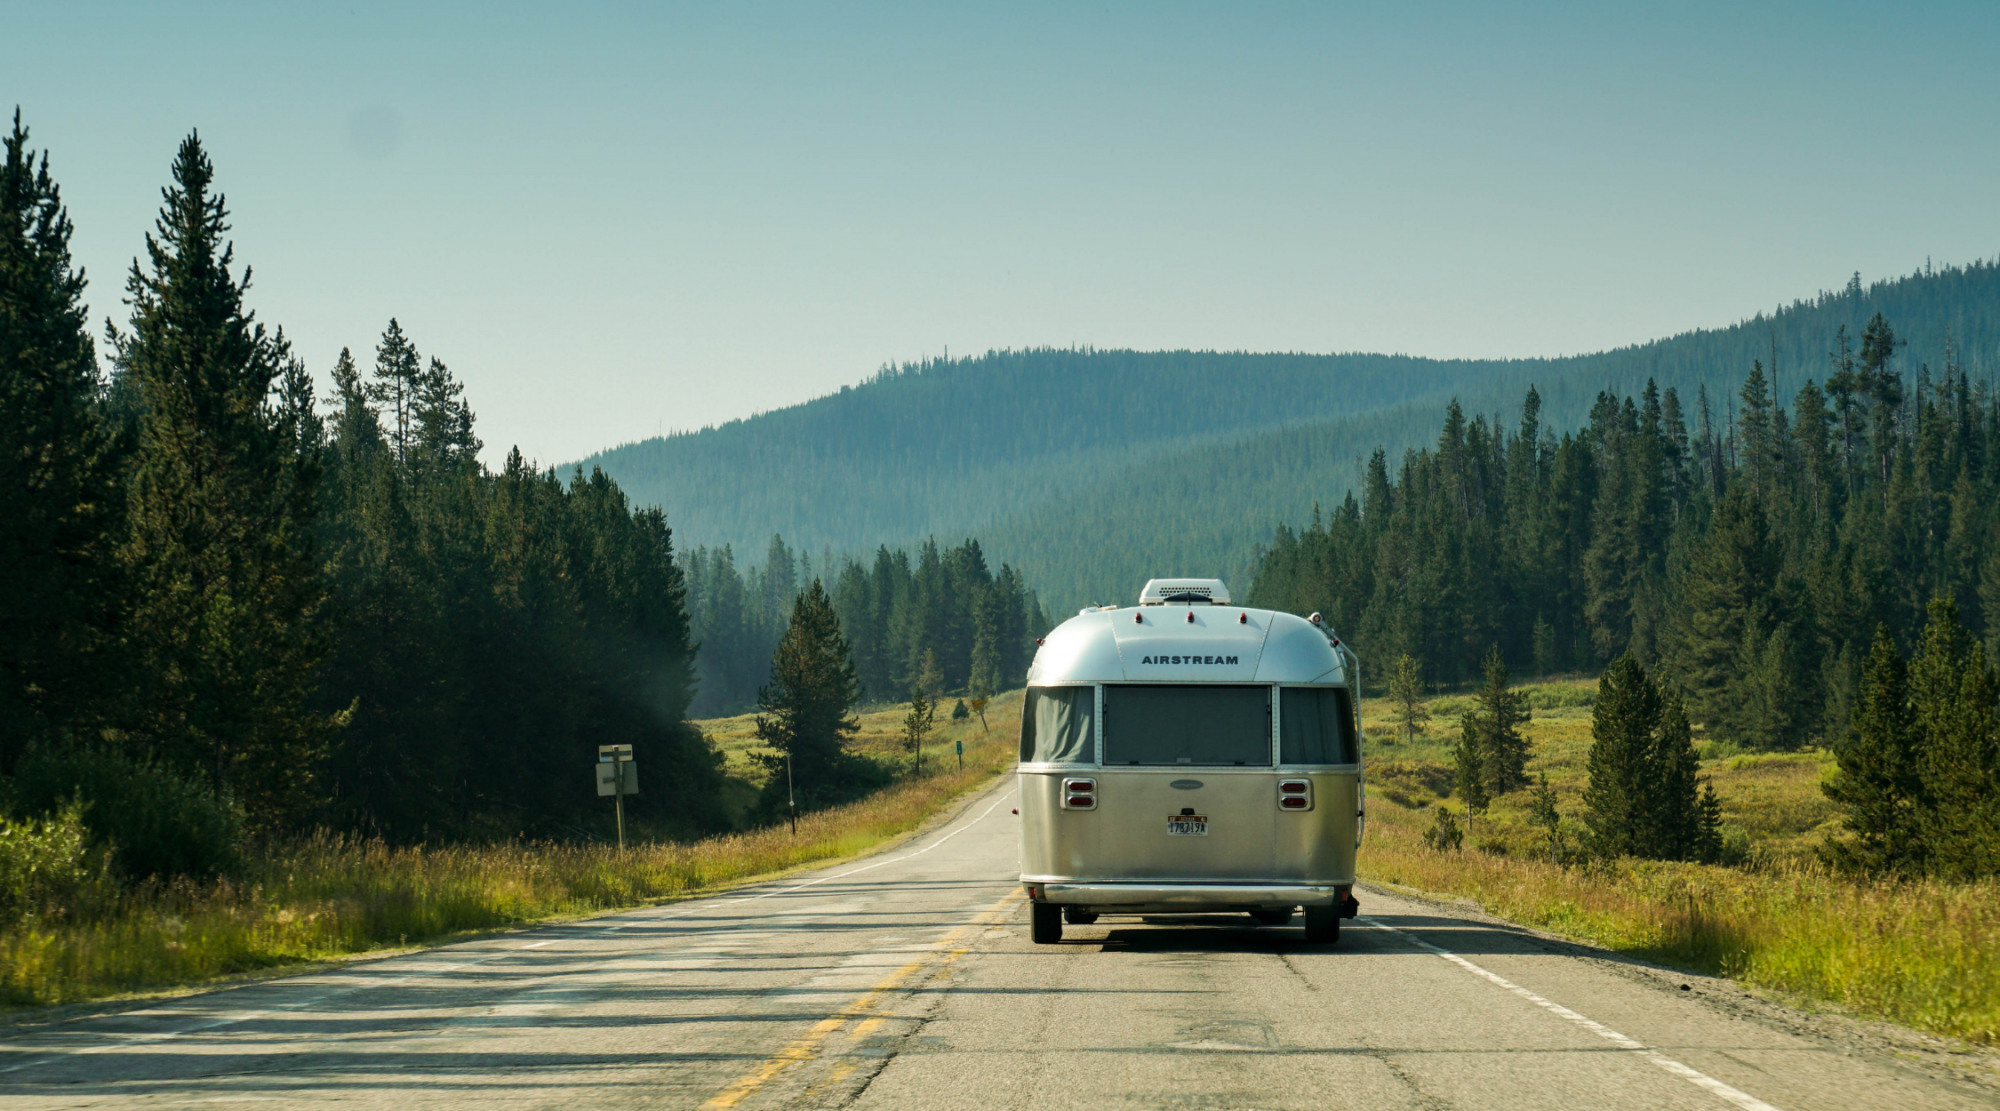 An Airstream trailer is traveling on a scenic road surrounded by dense forests and hills under a clear sky.